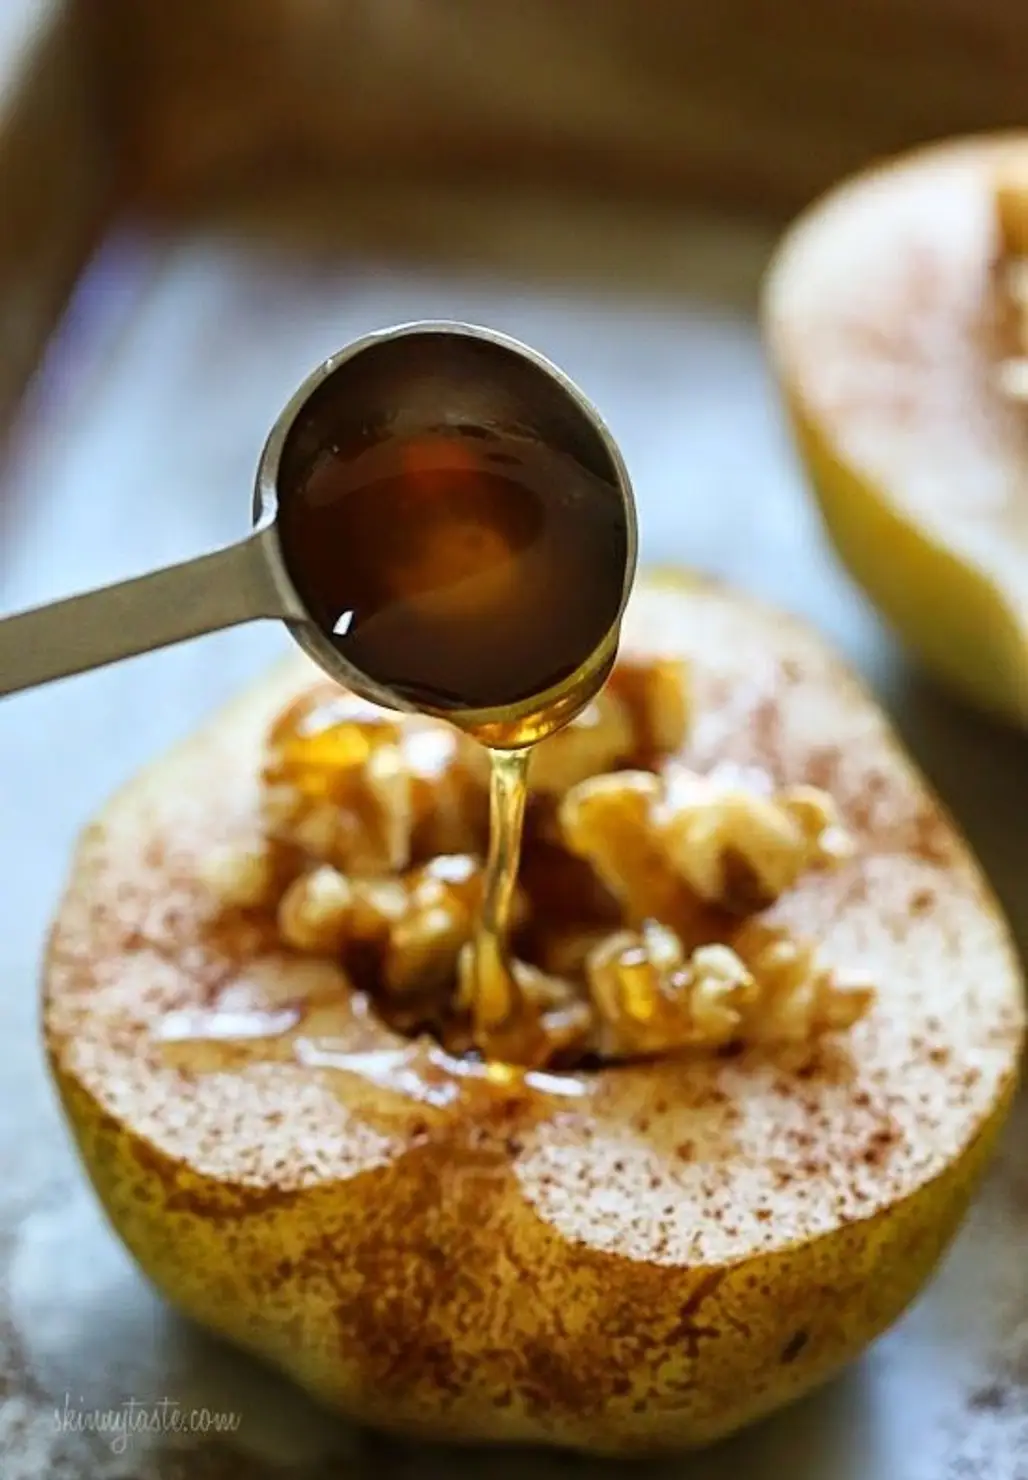 Baked Pears with Walnuts & Honey